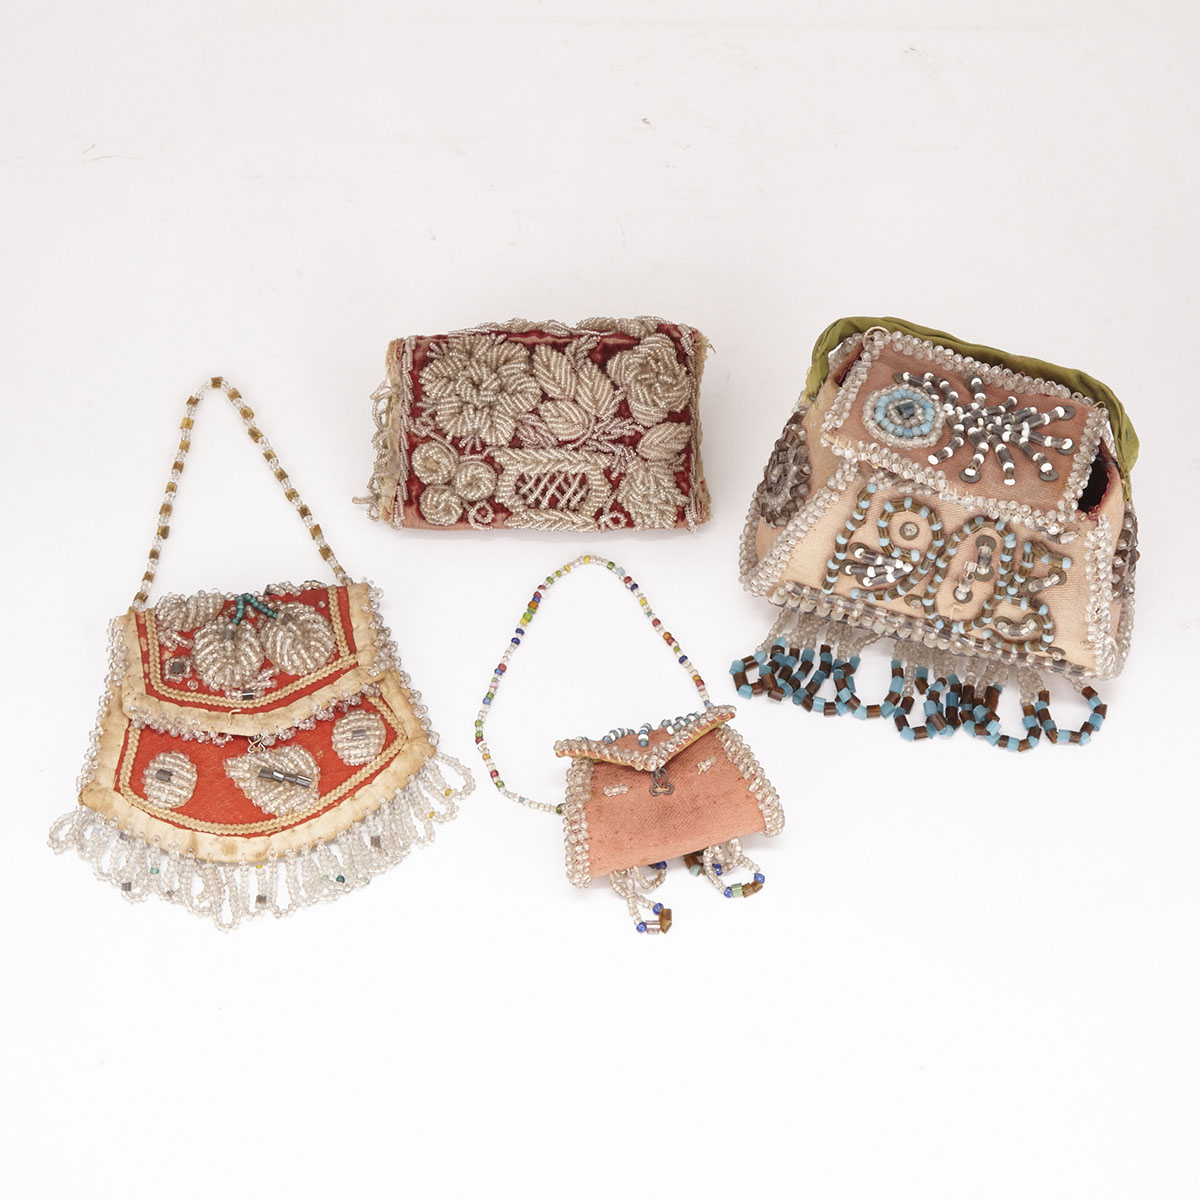 Four Iroquois Beadwork Purse Form Whimsies, late 19th/early 20th century